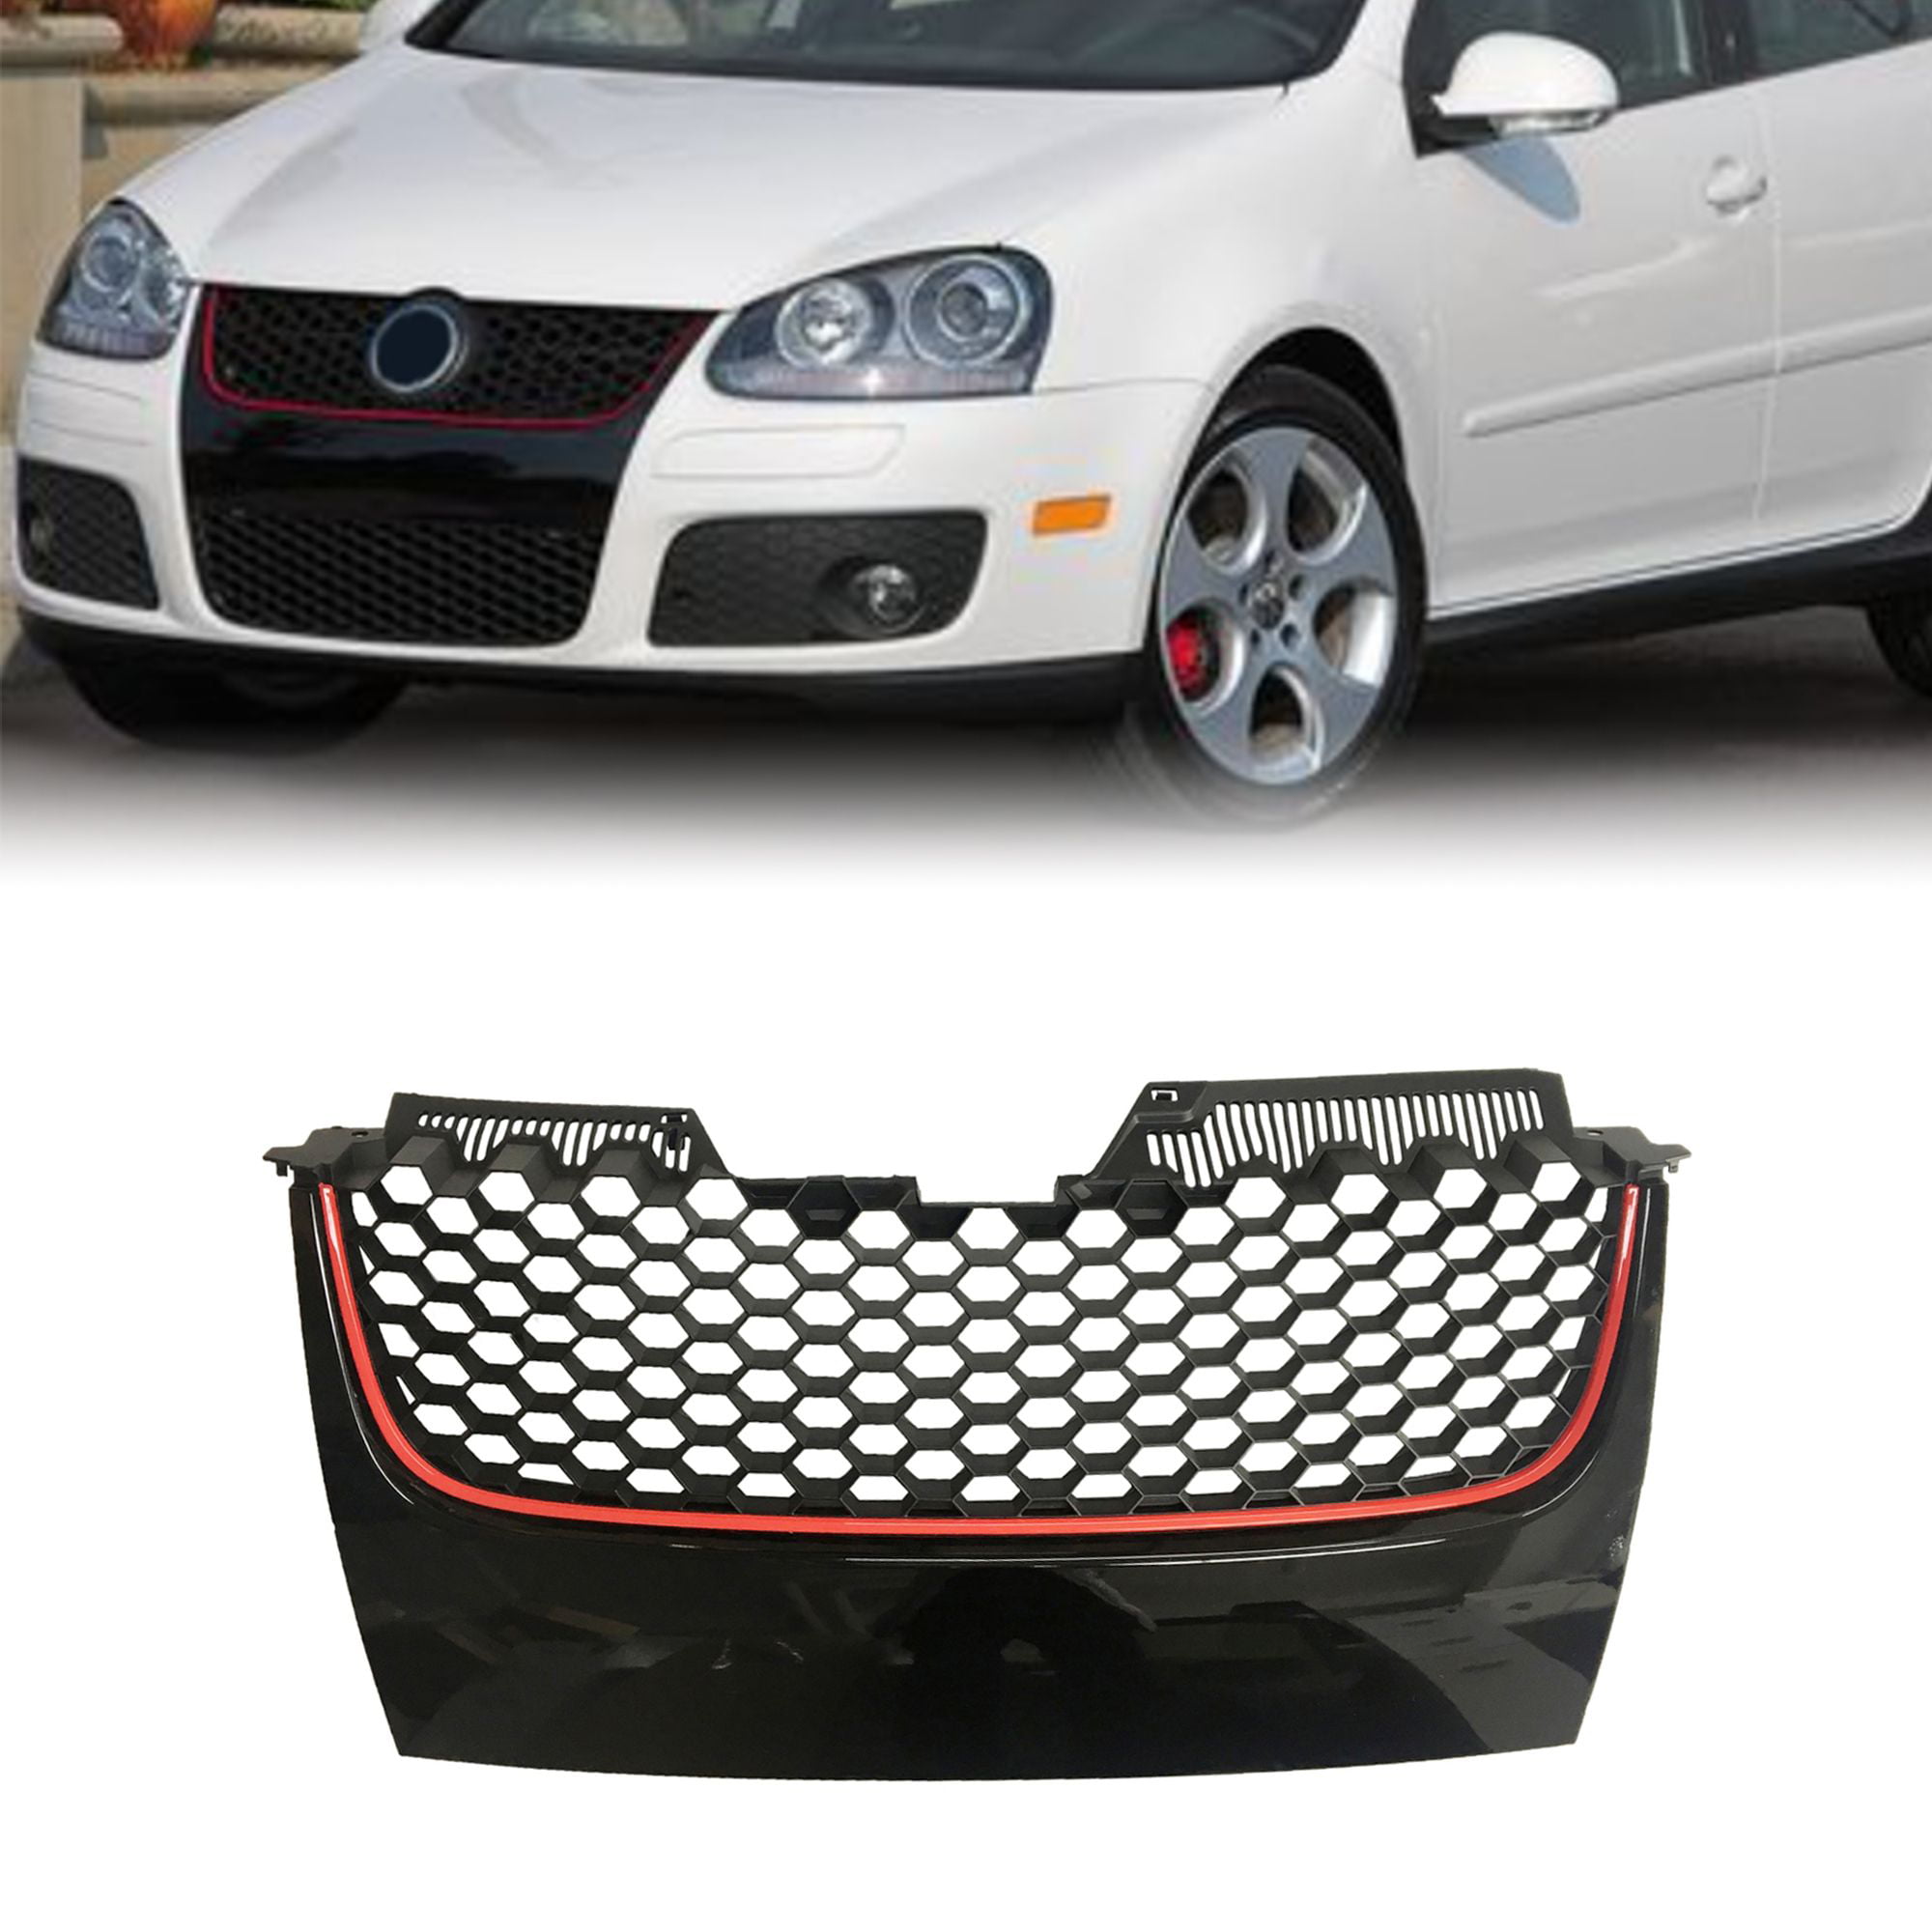  [GT-Speed] Compatible/Replacement for Front Bumper Lip, V Style  PU Front Lip Spoiler Black, 2006 2007 2008 2009 Volkswagen Golf GTI  (Compatible with MK5 Model Only/Not Rabbit) : Automotive